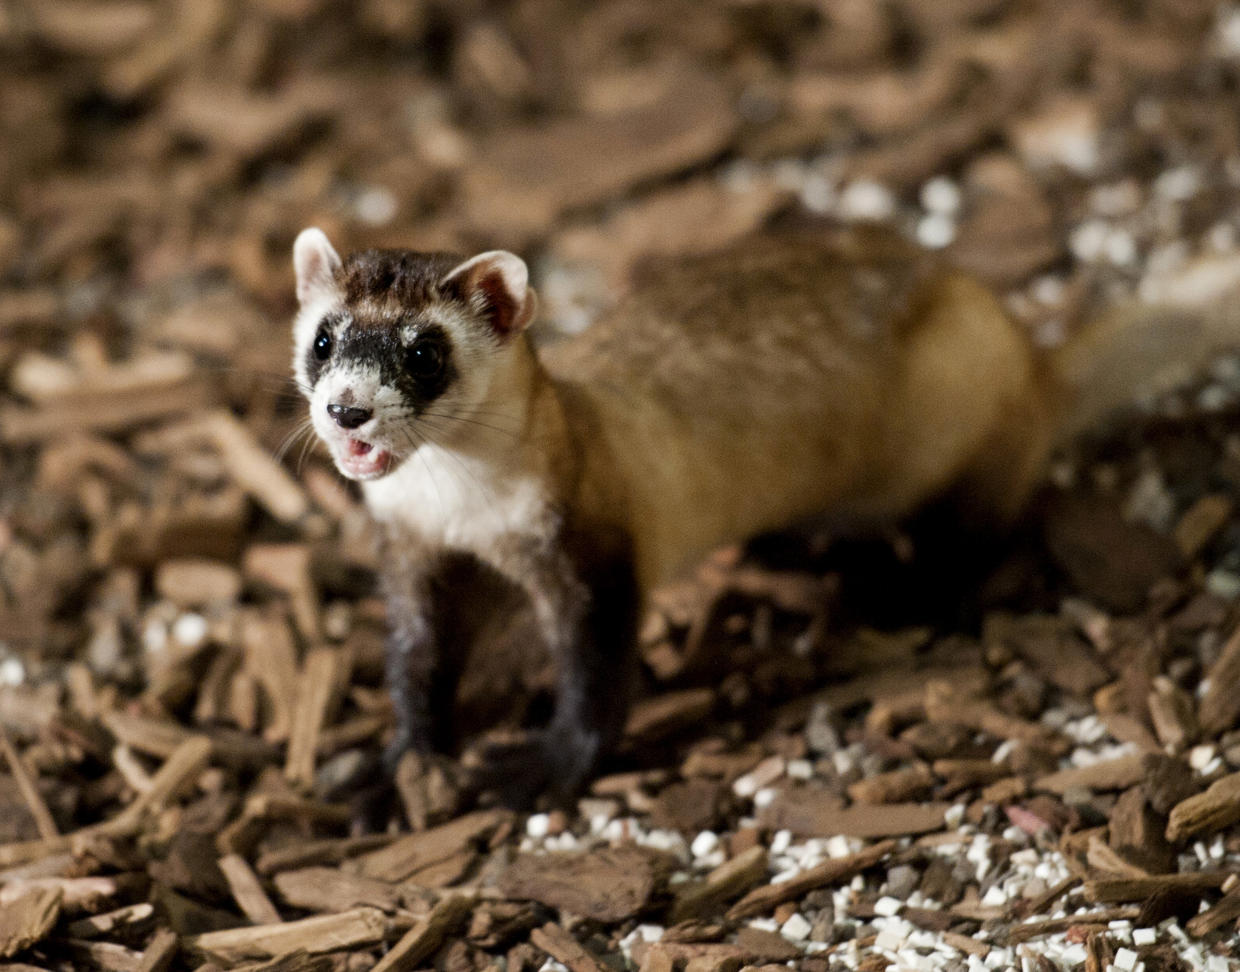 Endangered ferrets go to "boot camp" in Va. - CBS News